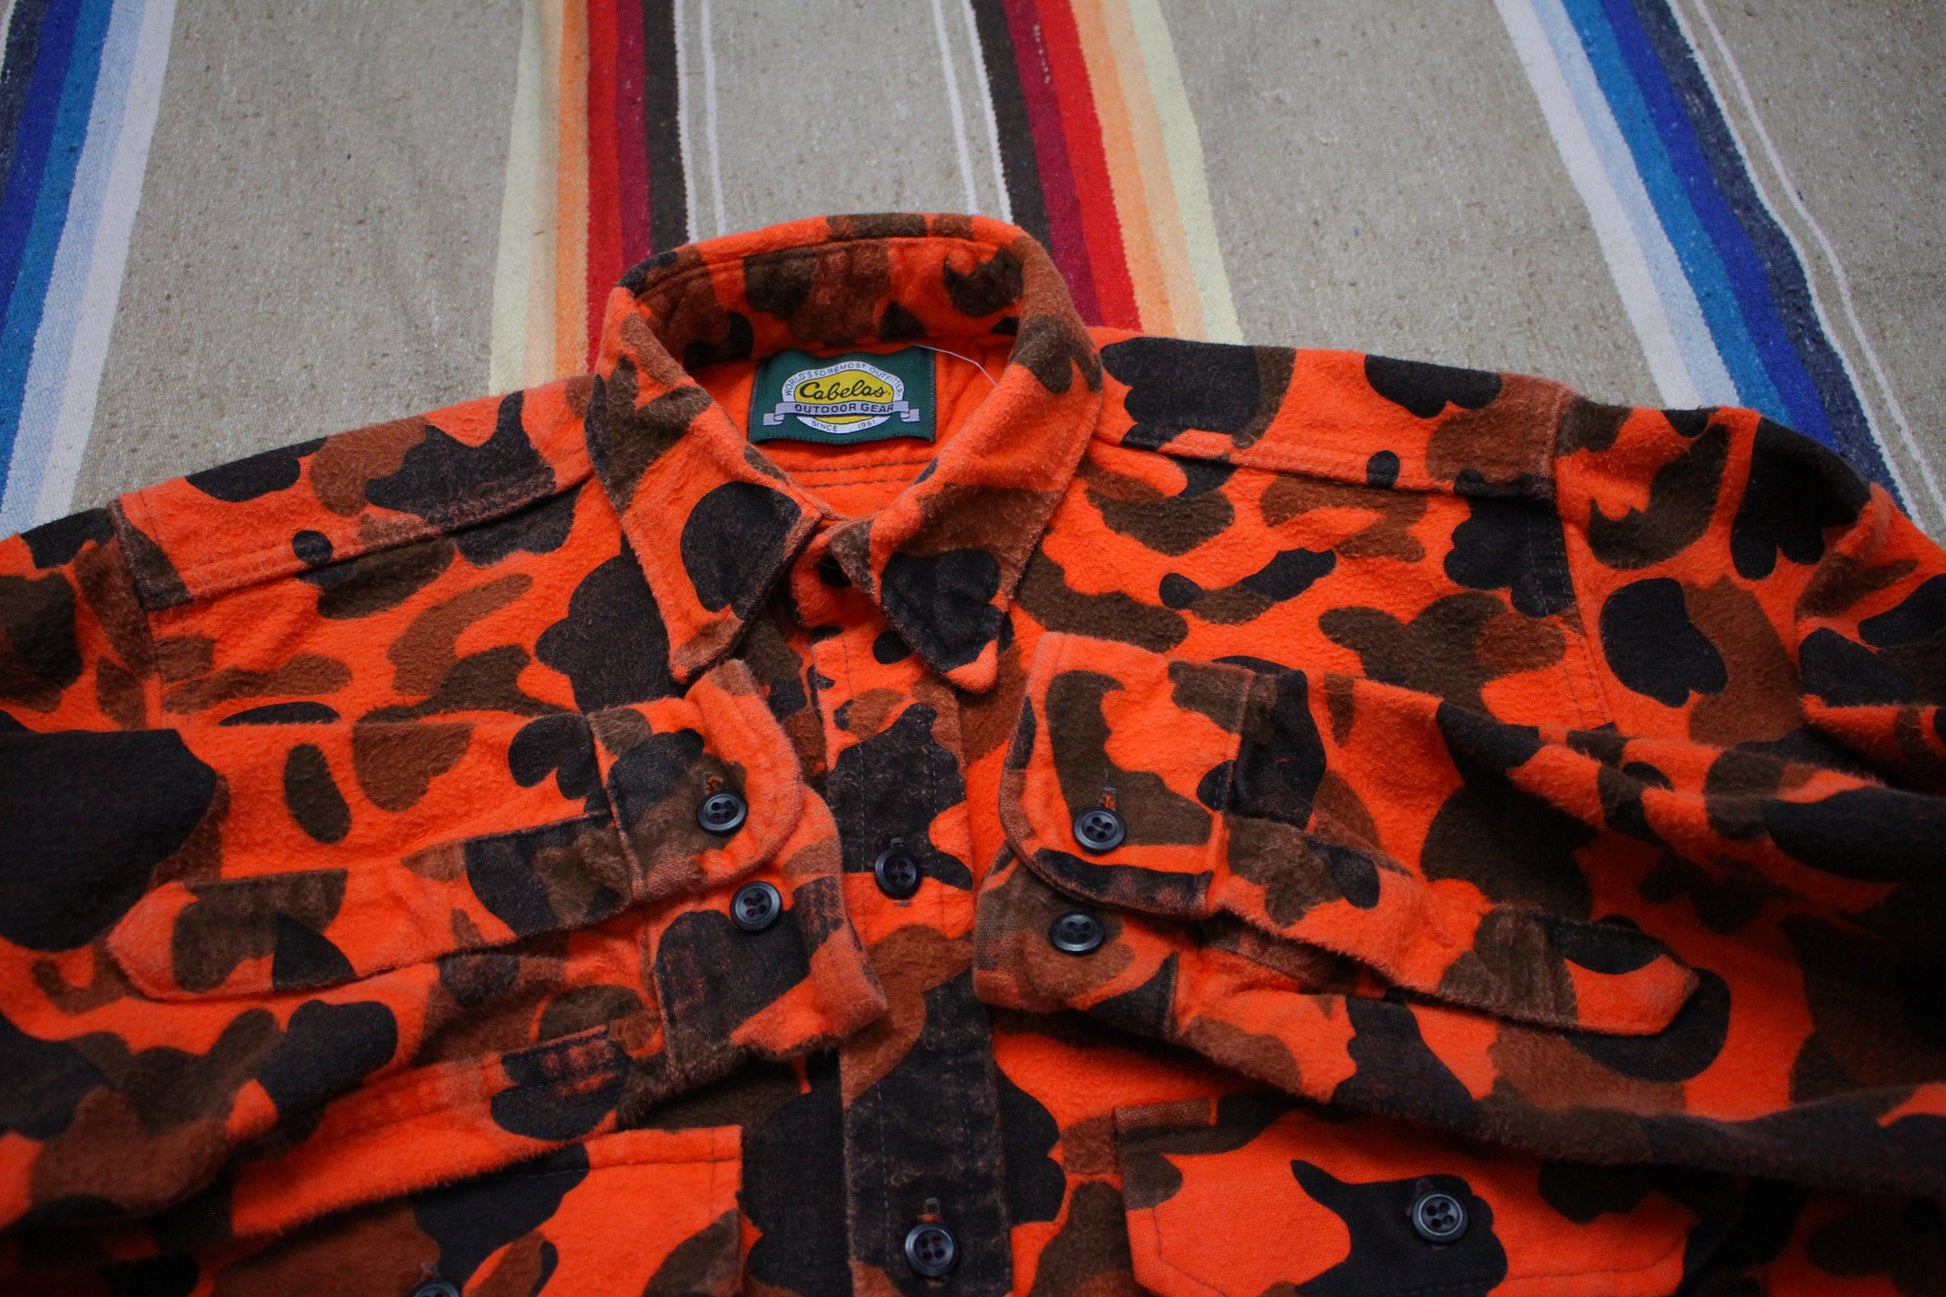 1990s Cabela's Orange Duck Camo Chamois Flannel Shirt Made in USA Size S/M